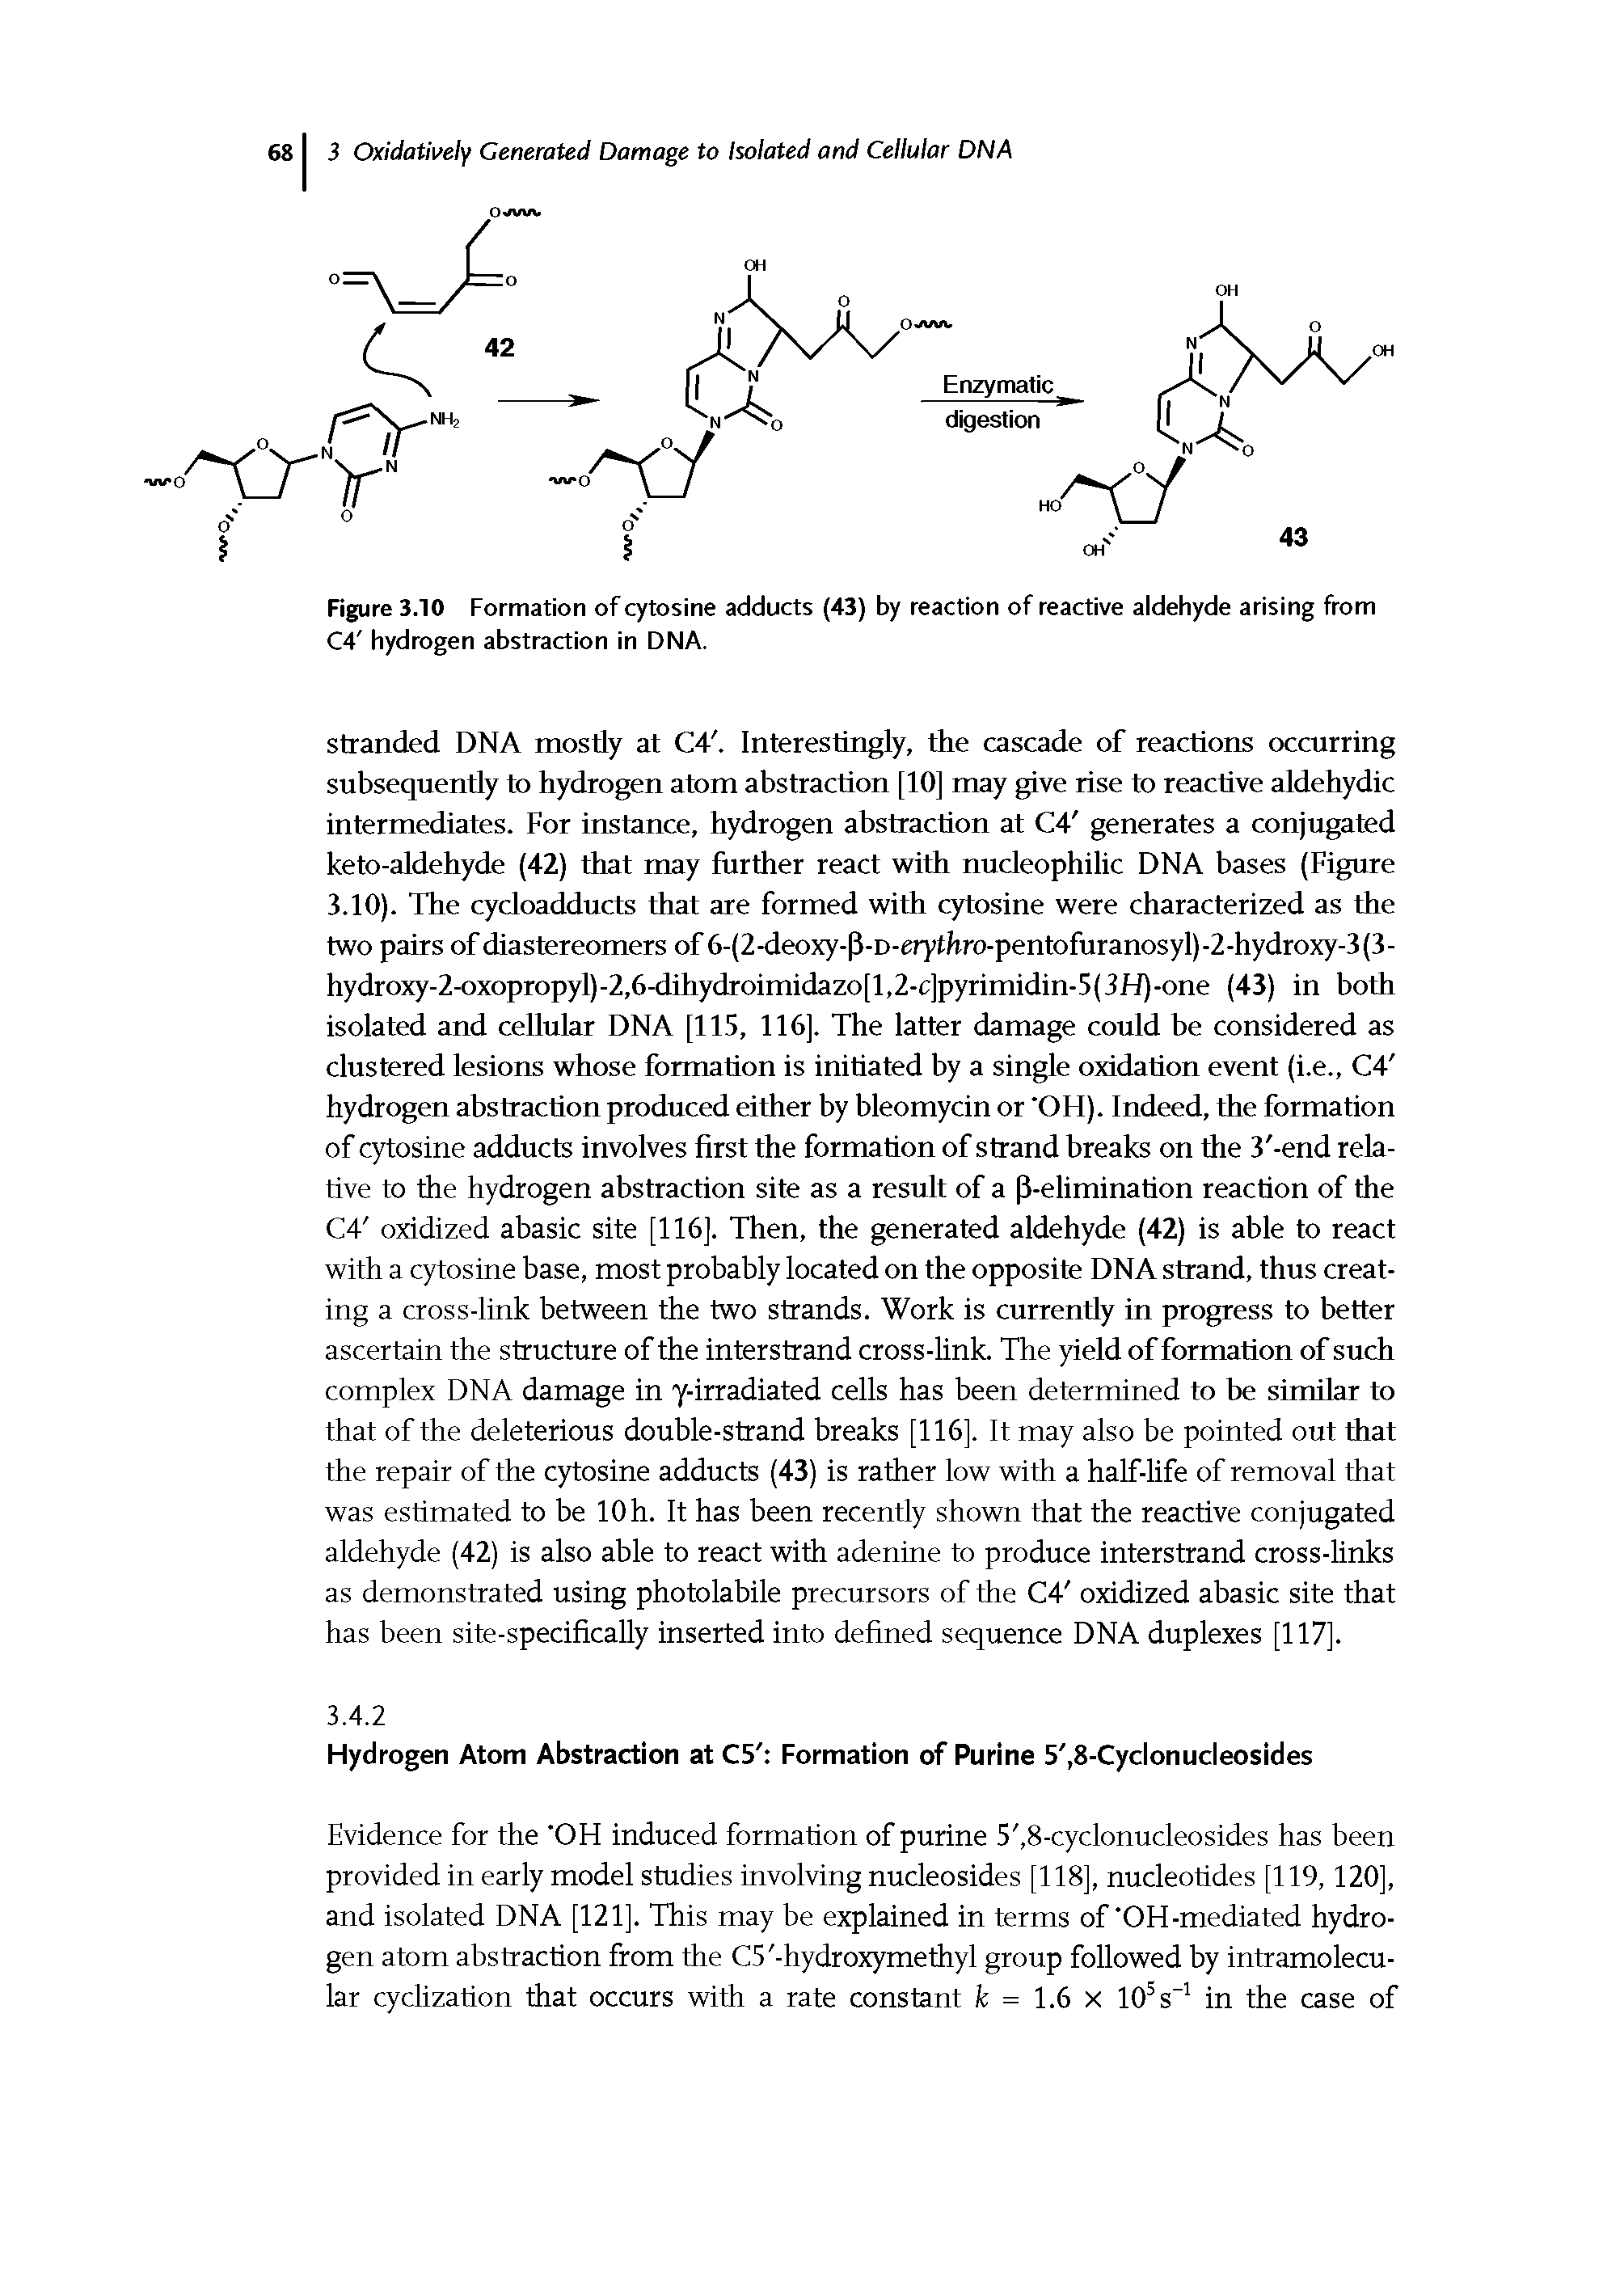 Figure 3.10 Formation of cytosine adducts (43) by reaction of reactive aldehyde arising from C4 hydrogen abstraction in DNA.